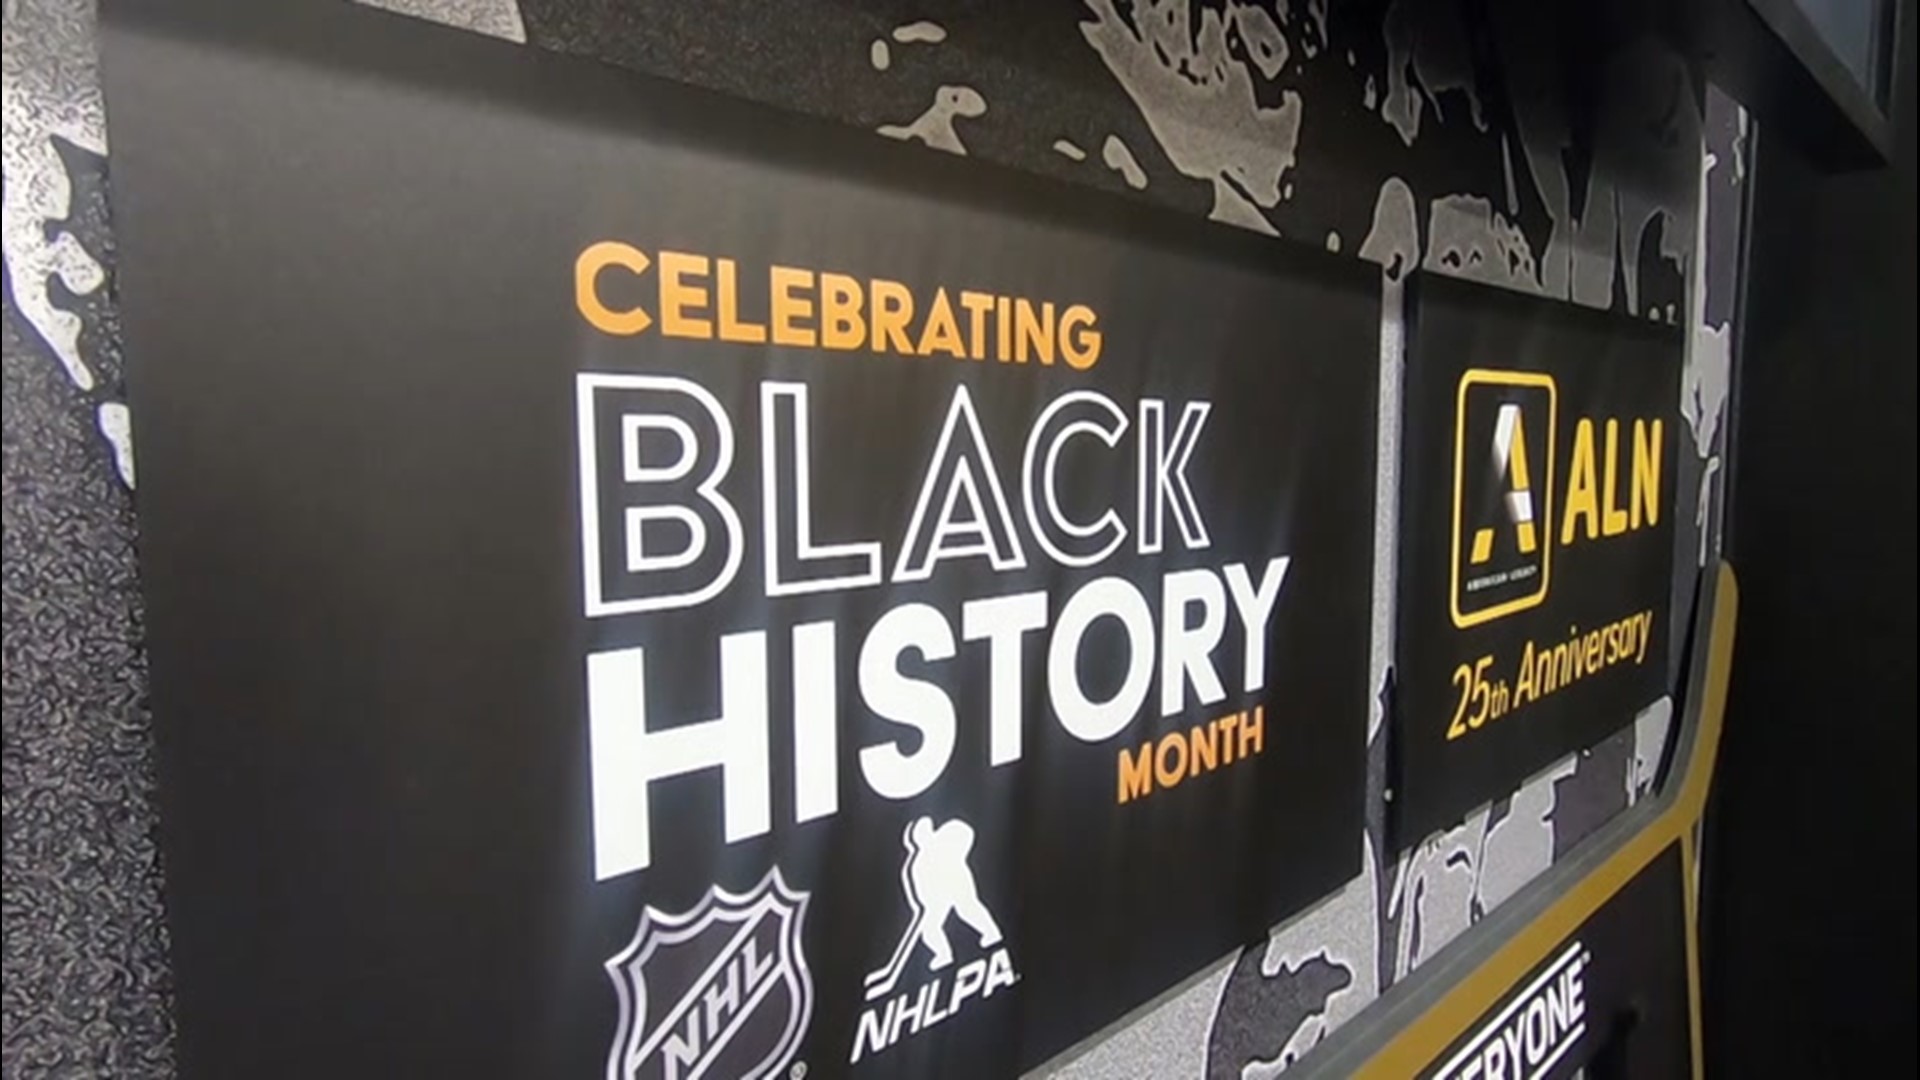 AccuWeather's Dexter Henry caught up with two players in the NHL who shared their experiences playing hockey as black men while helping to make the sport more diverse.